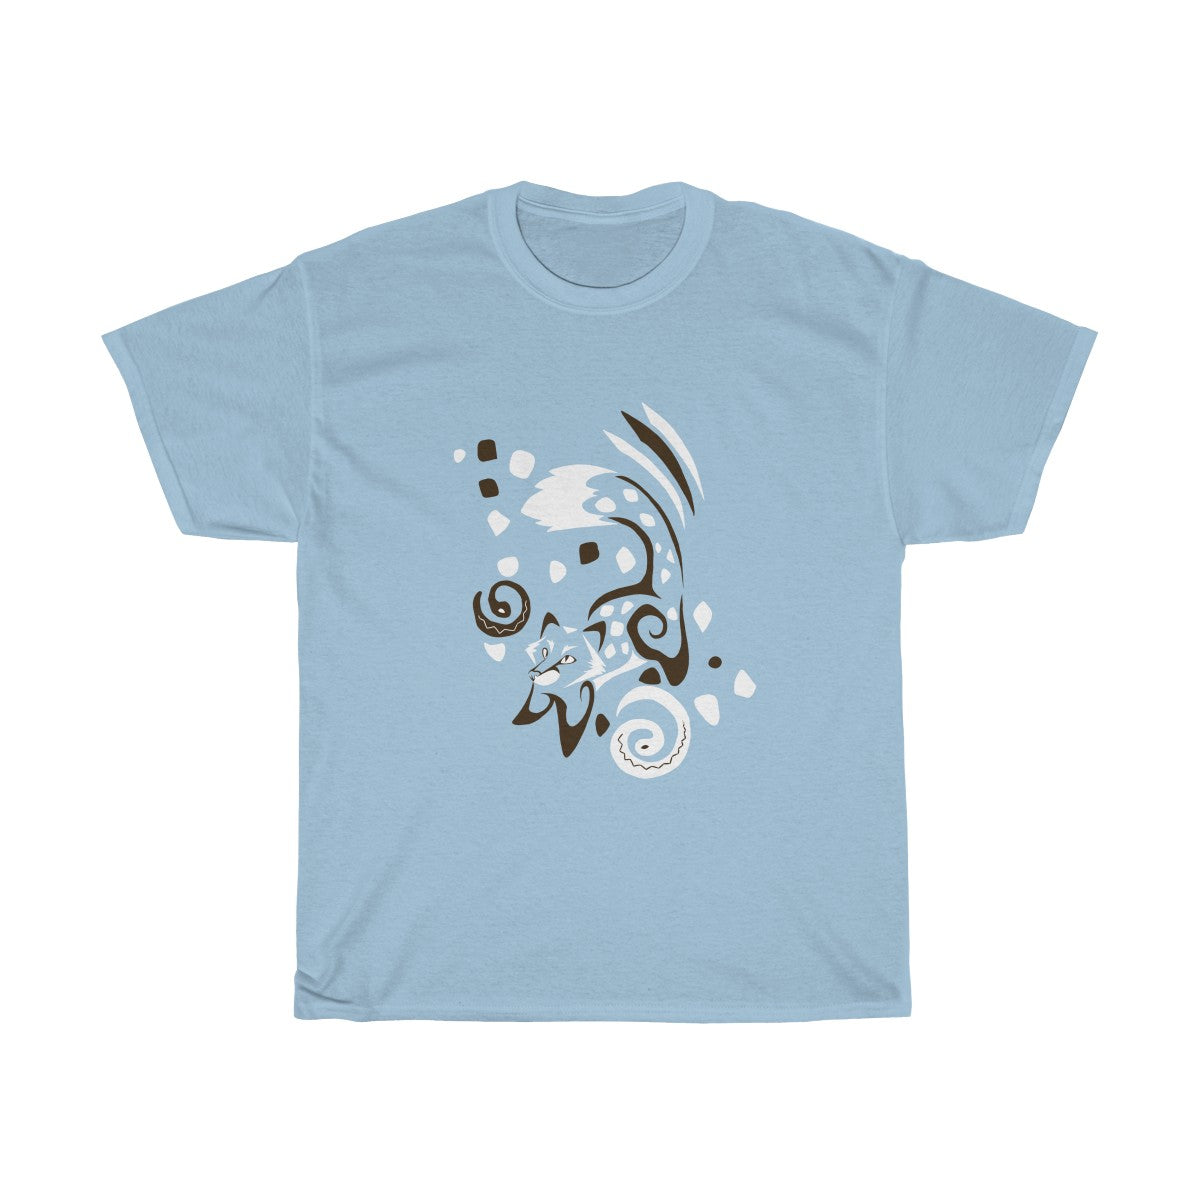 Foxes & Vipers - T-Shirt T-Shirt Dire Creatures Light Blue S 